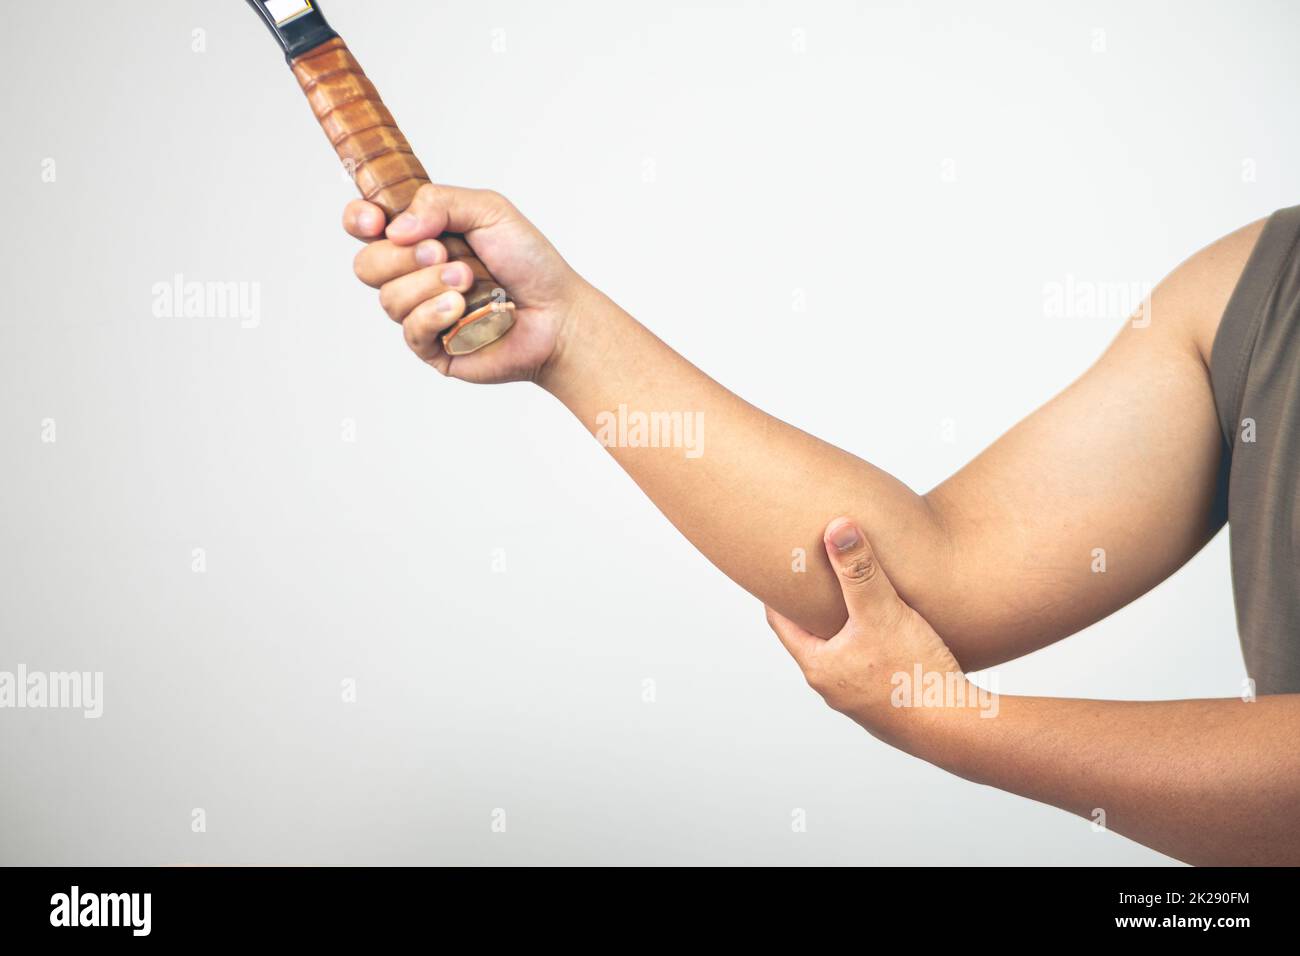 Tennis elbow injury concept. The man holds racket. Healthcare knowledge. Medium close up shot with copy space. Stock Photo